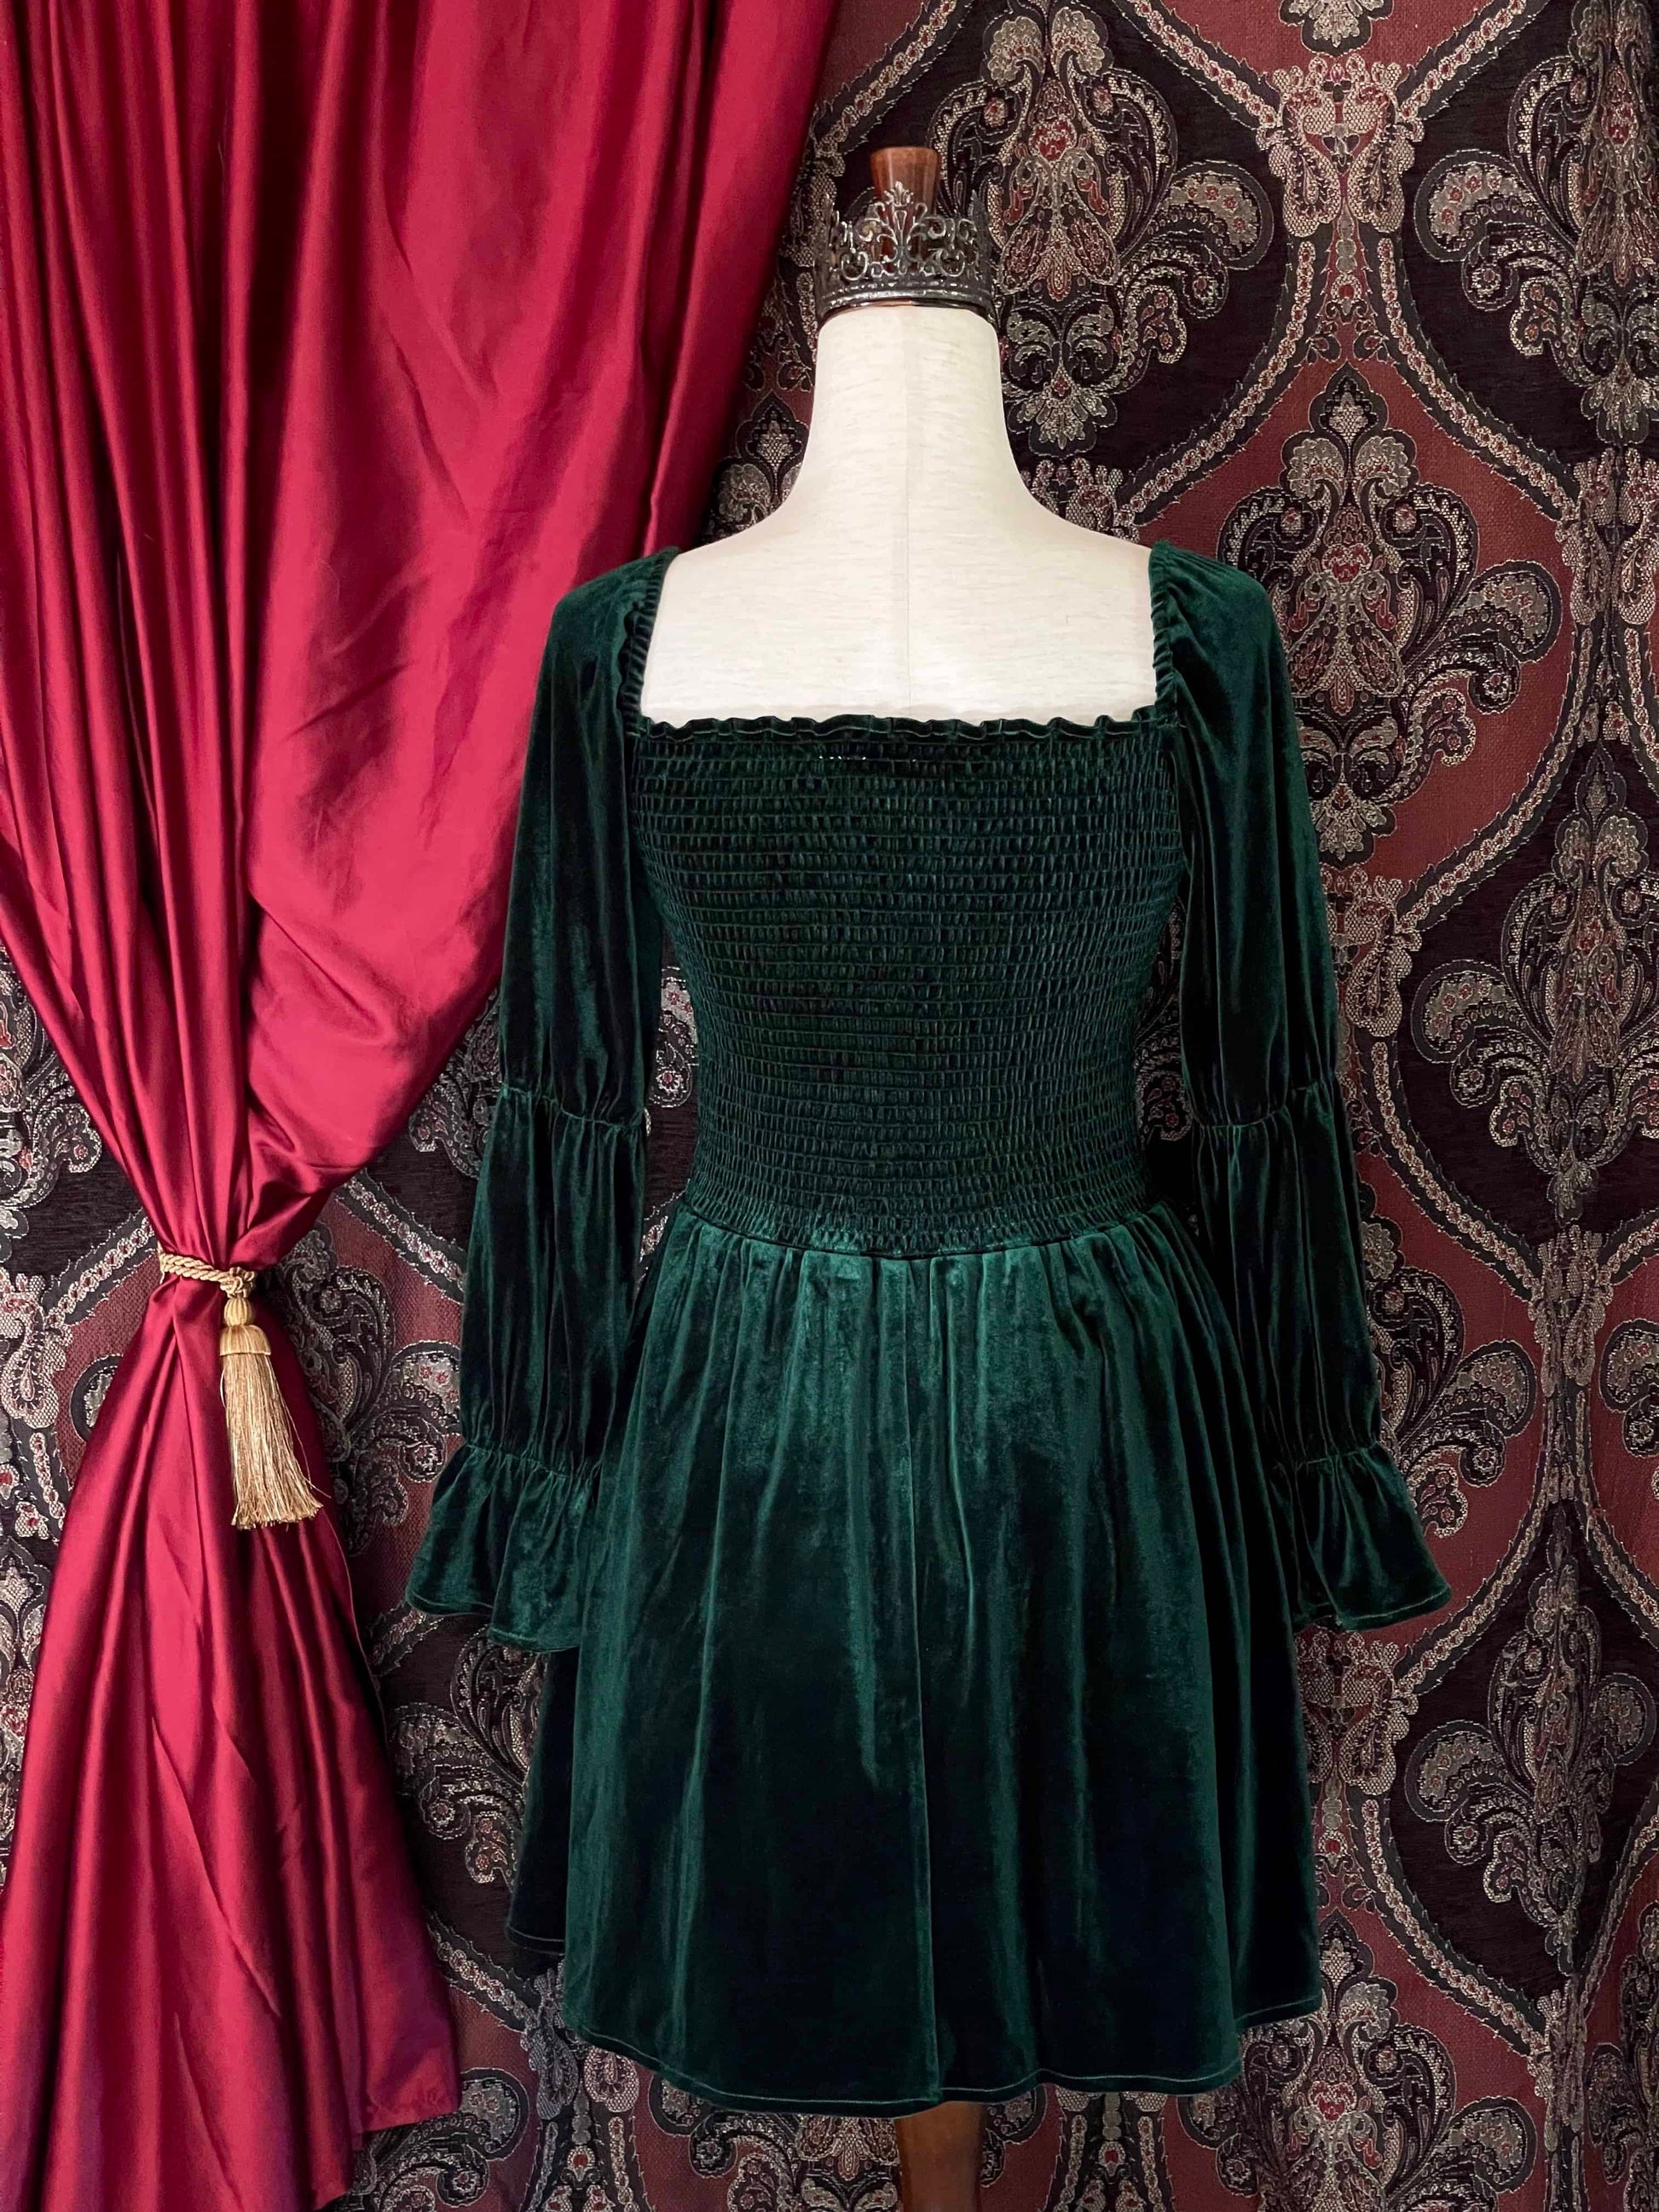 A Renaissance Inspired emerald green velvet smocked mini dress with puff virago sleeves is pictured on a mannequin in front of an ornate background.